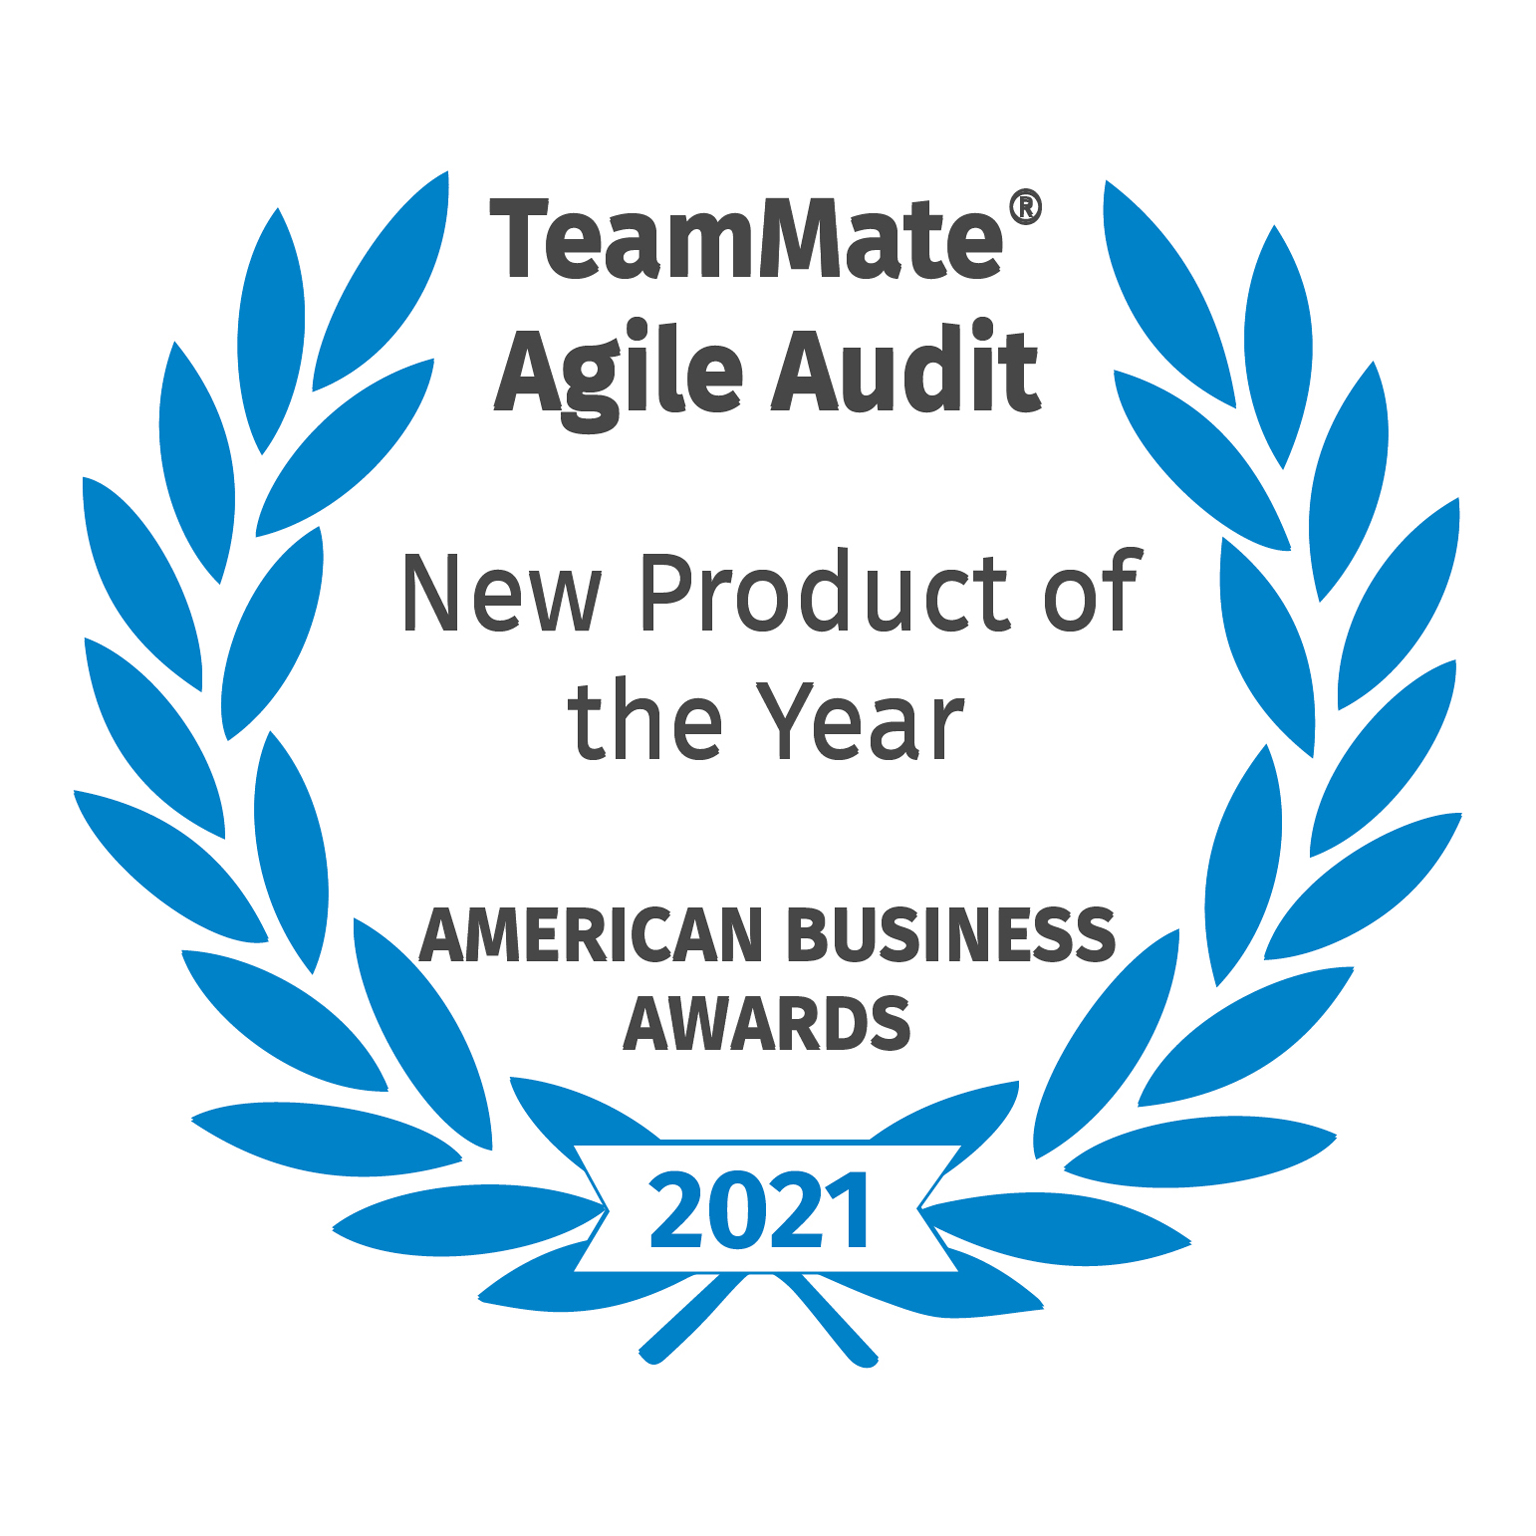 TeamMate Agile Audit - New Product of the Year - American Business Awards - 2021